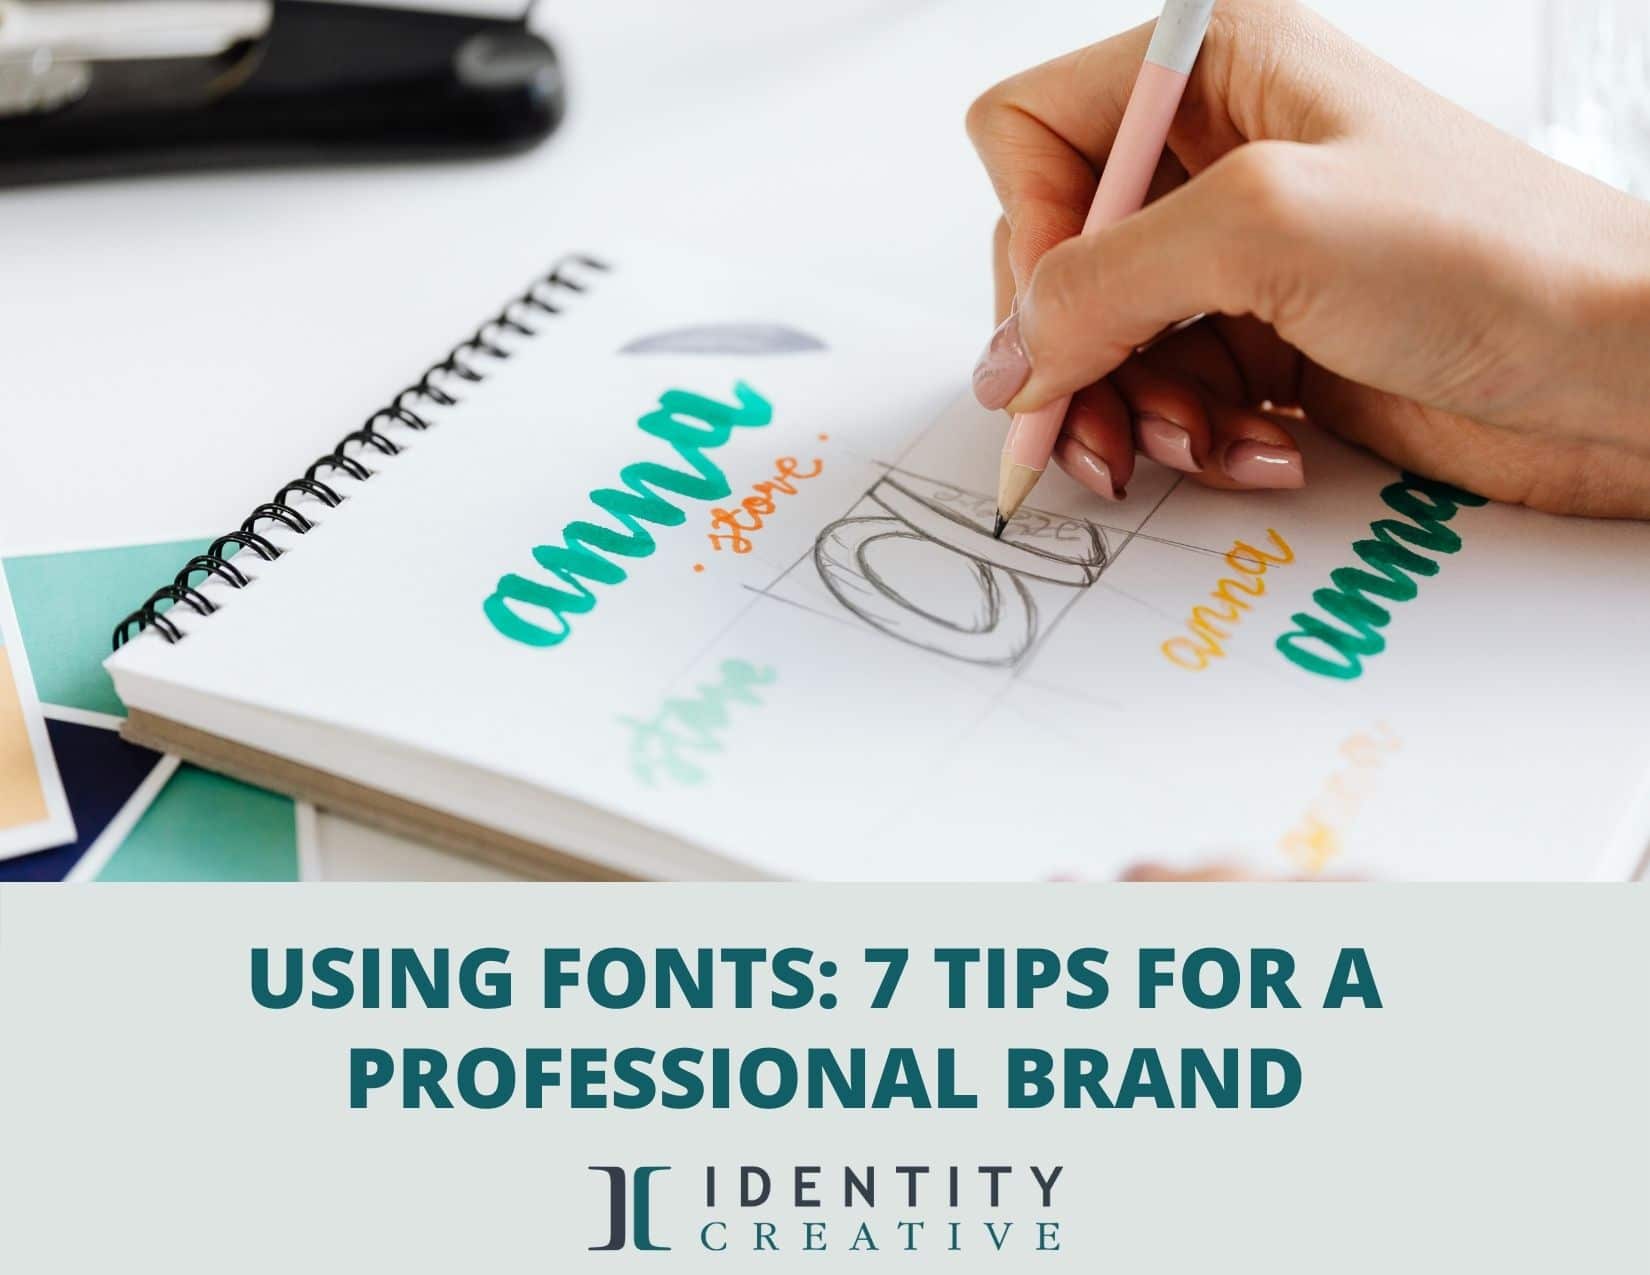 Using Fonts: 7 Tips for a Professional Brand